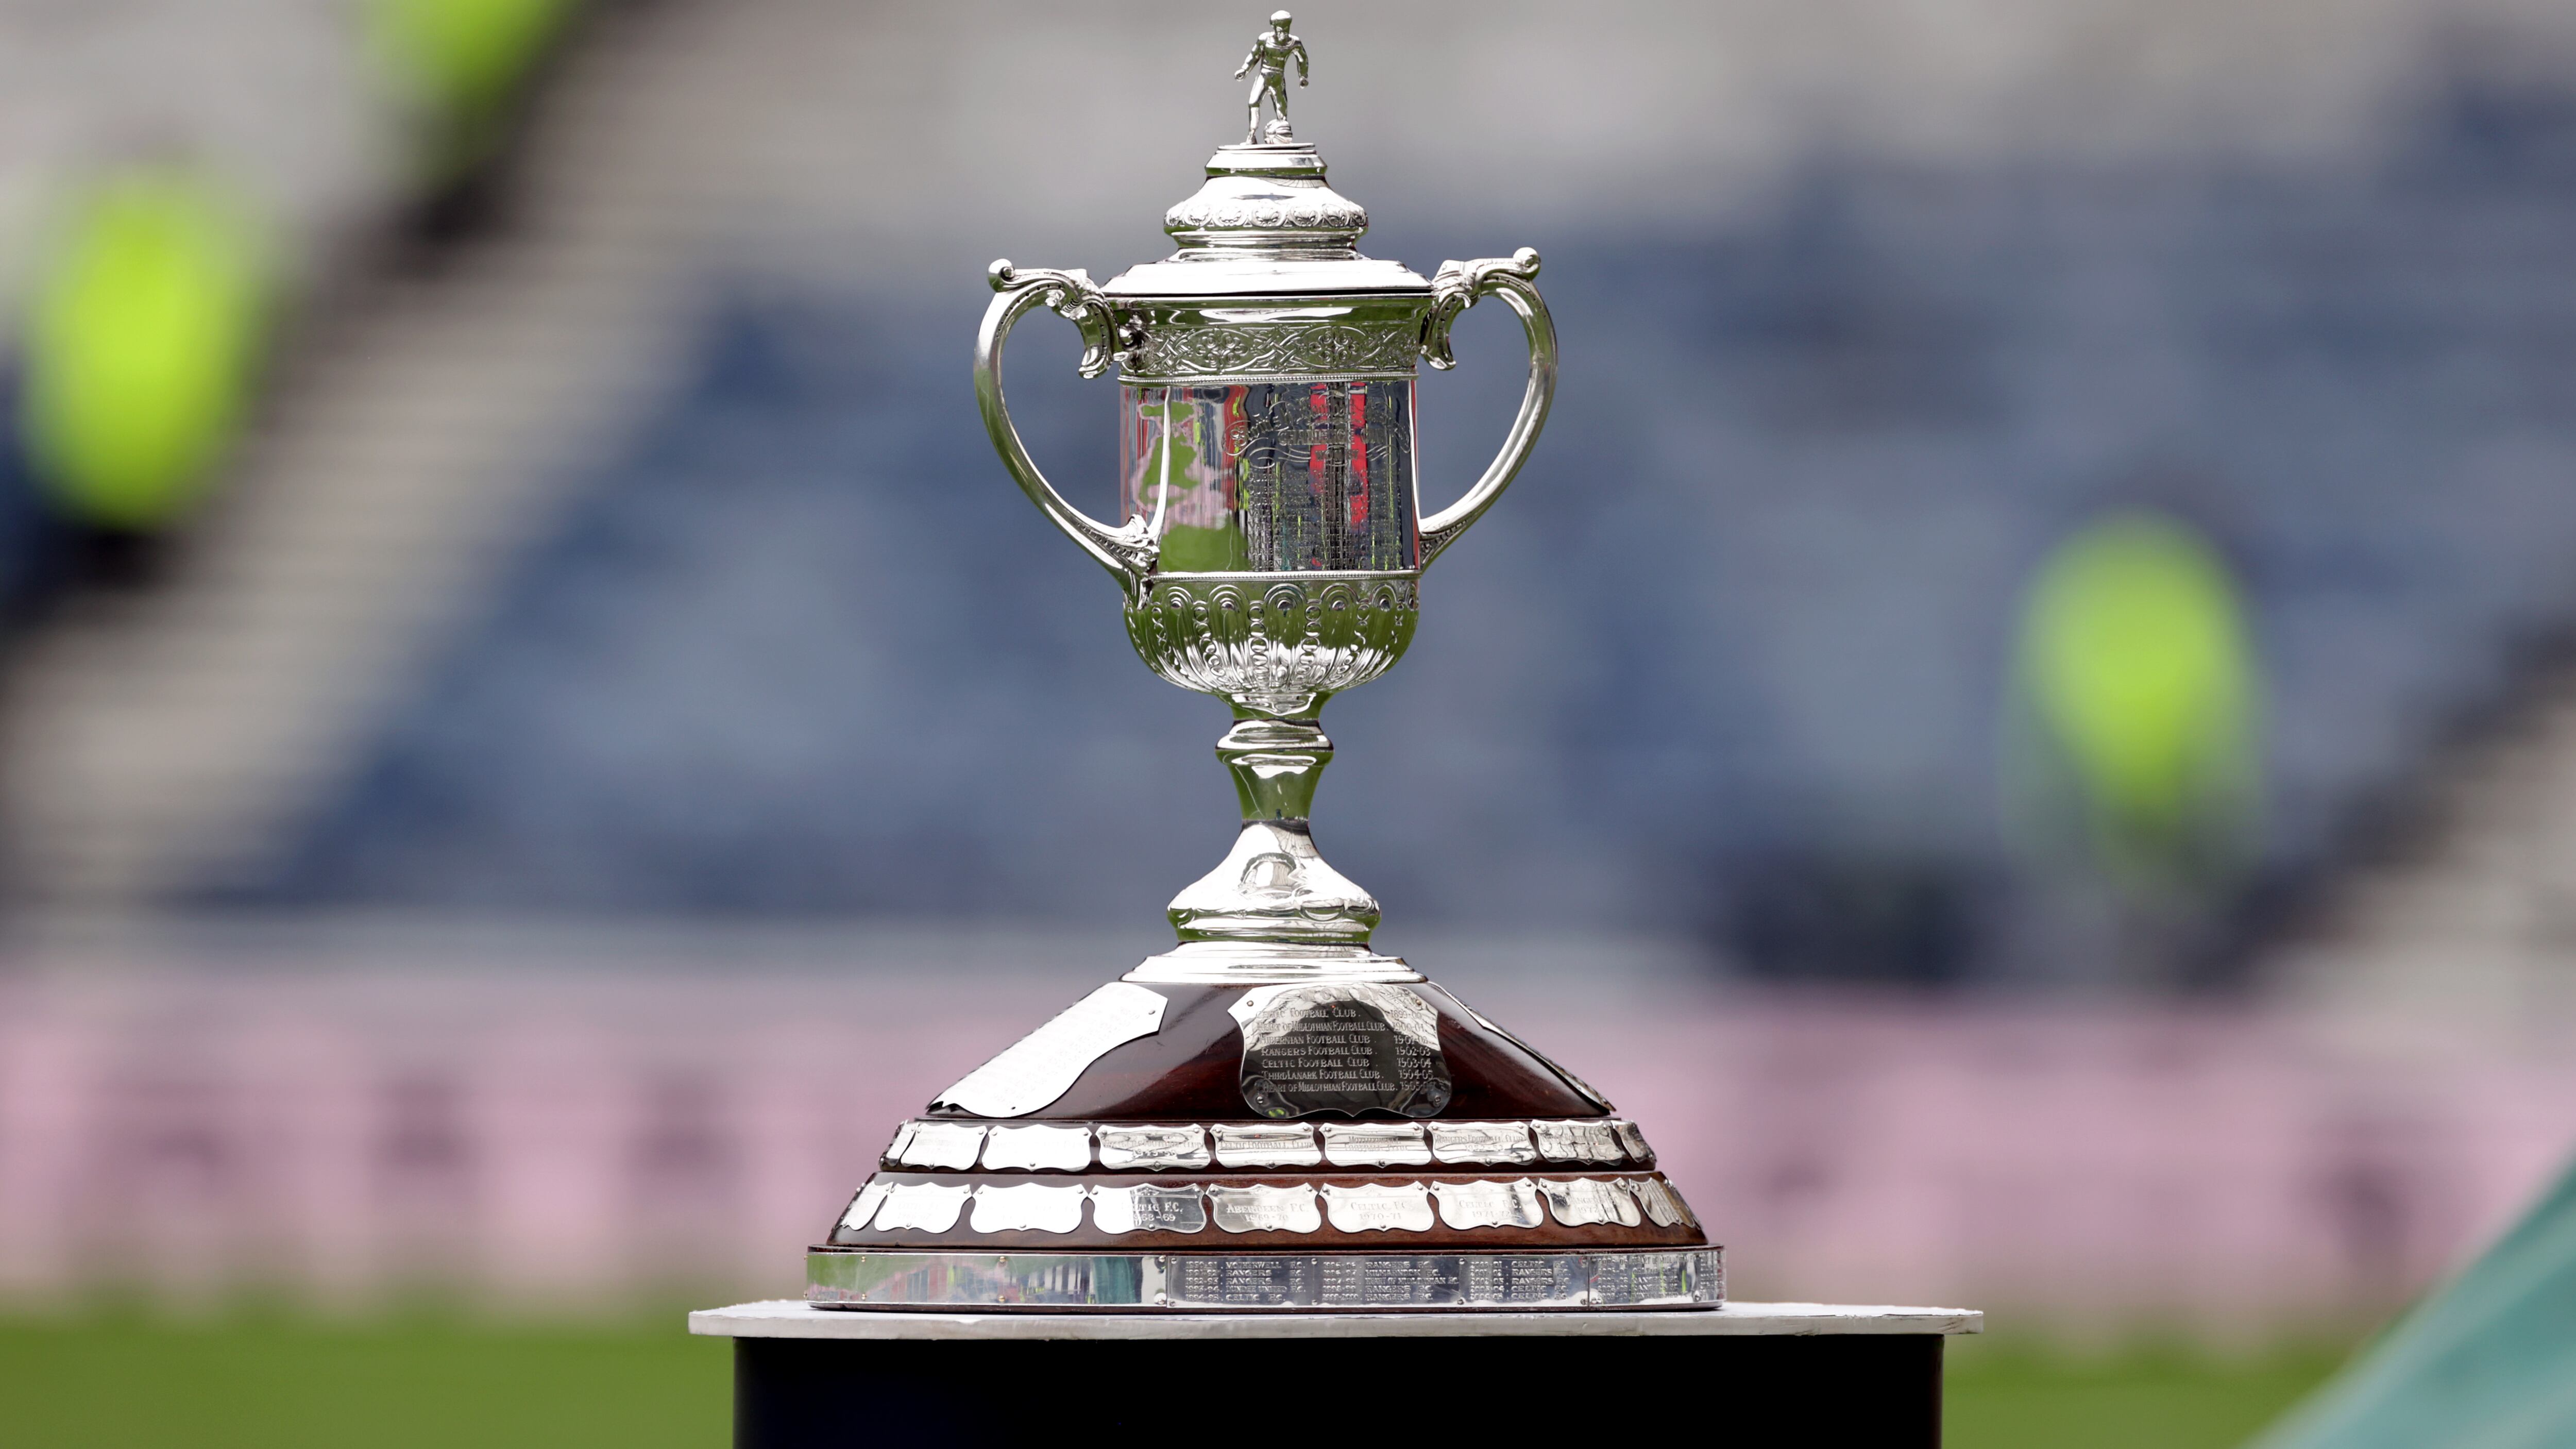 The Scottish Gas Scottish Cup trophy is up for grabs at Hampden